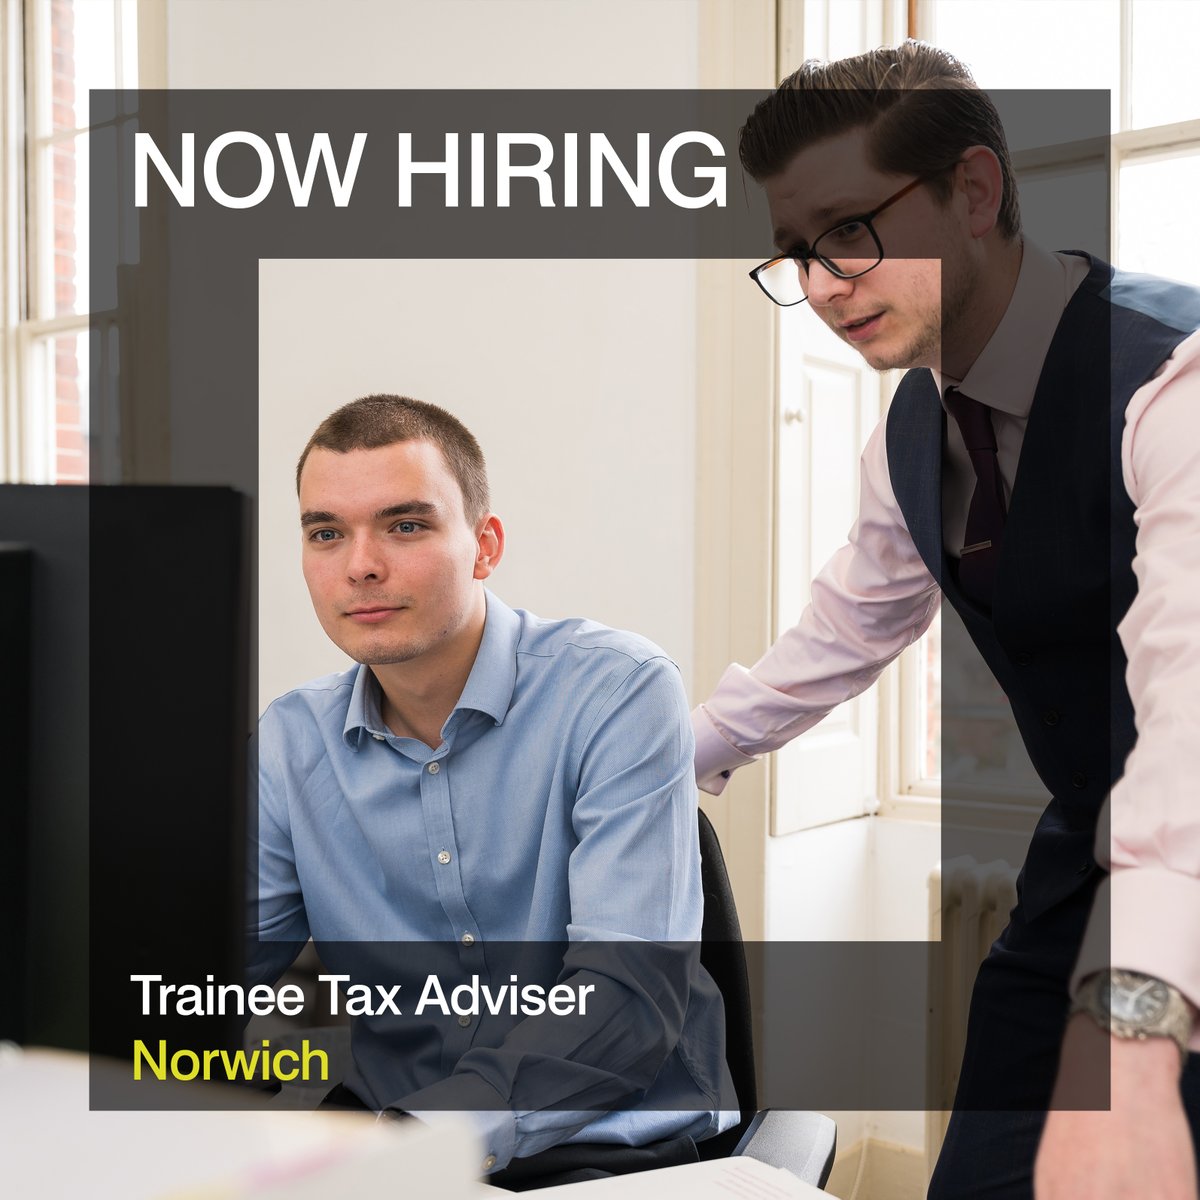 📣 Join our team in Norwich as a Trainee Tax Adviser For more information and to apply, click on the link below. Don't miss out on this exciting opportunity. mapartners.co.uk/careers/traine…